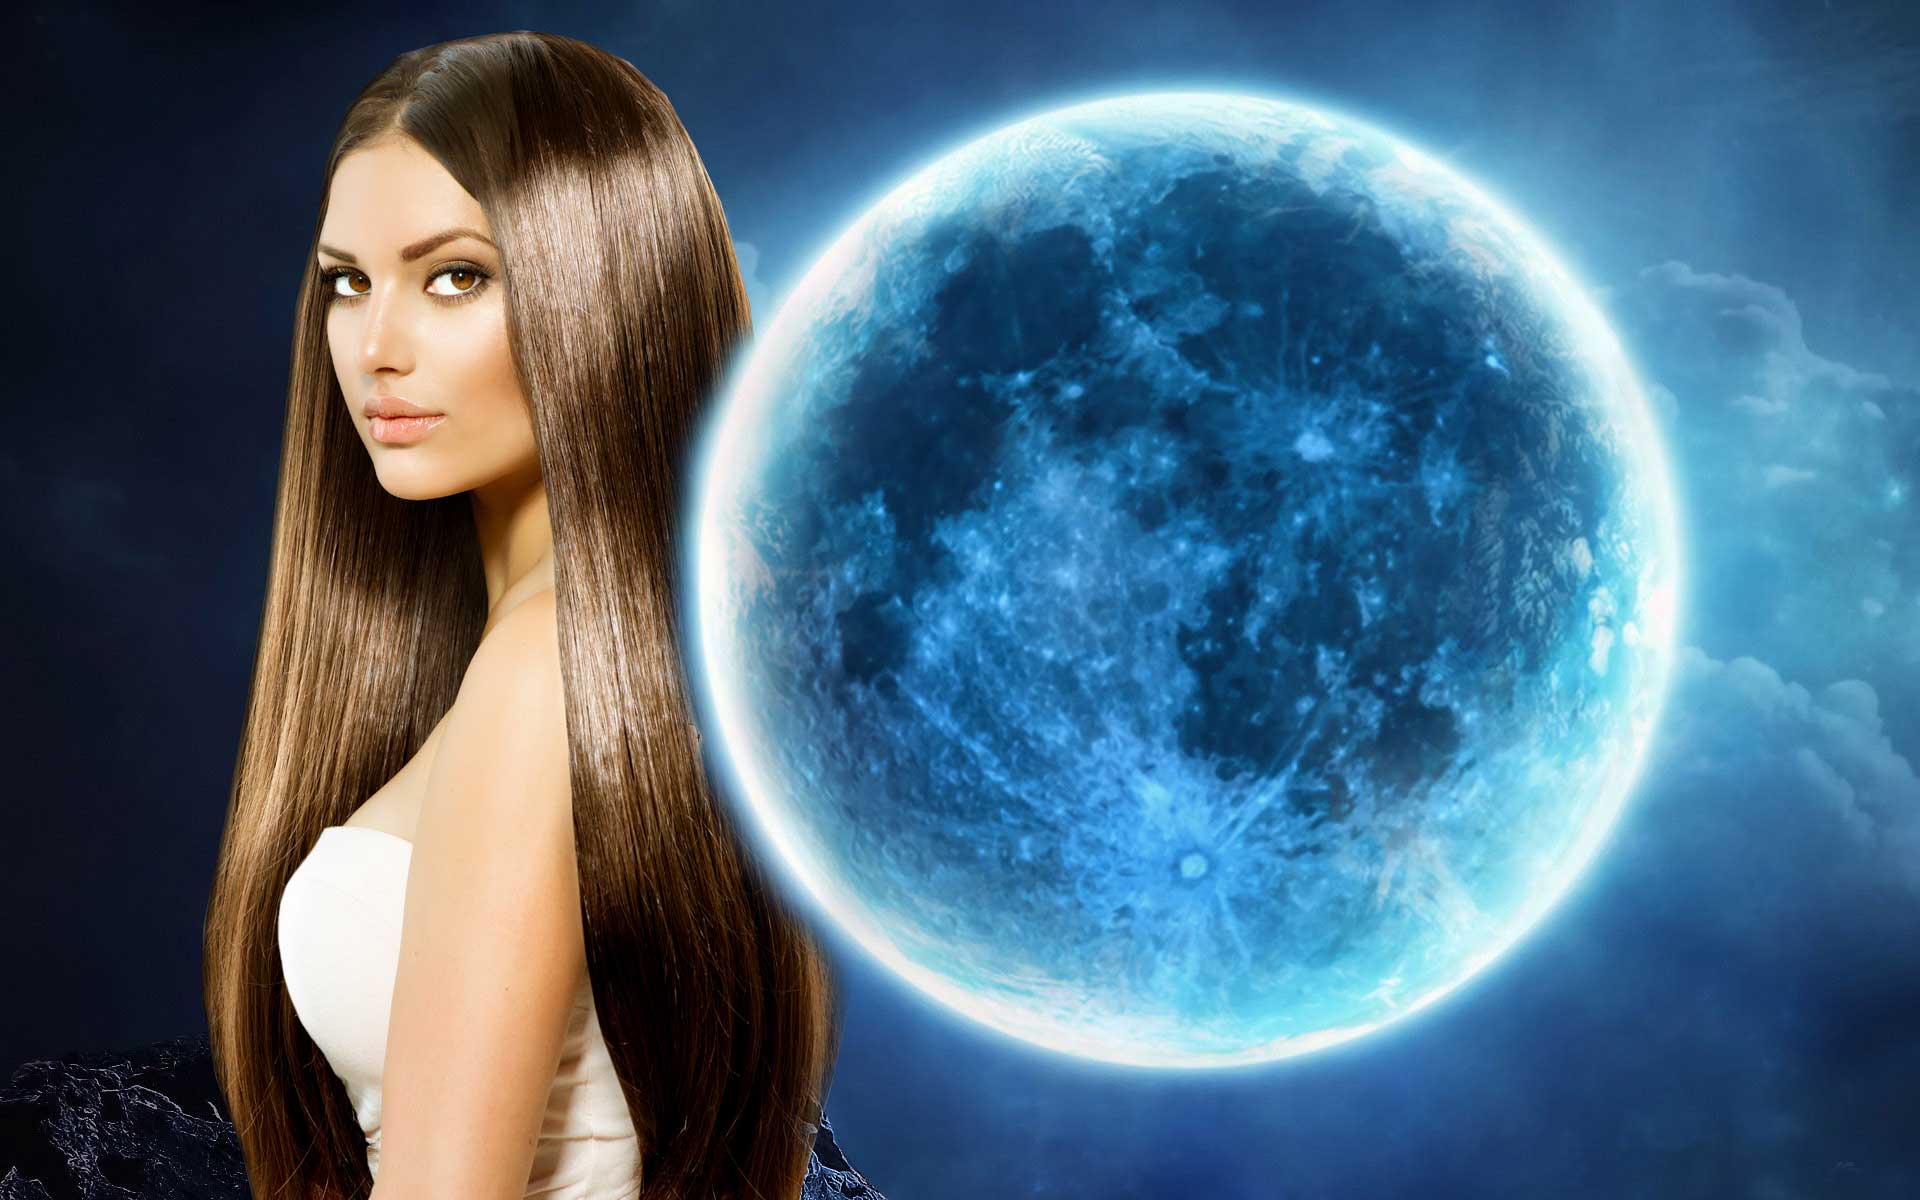 Does The Moon Affect Your Hair? How To Use The Lunar Cycle To Time Your Cut & Color